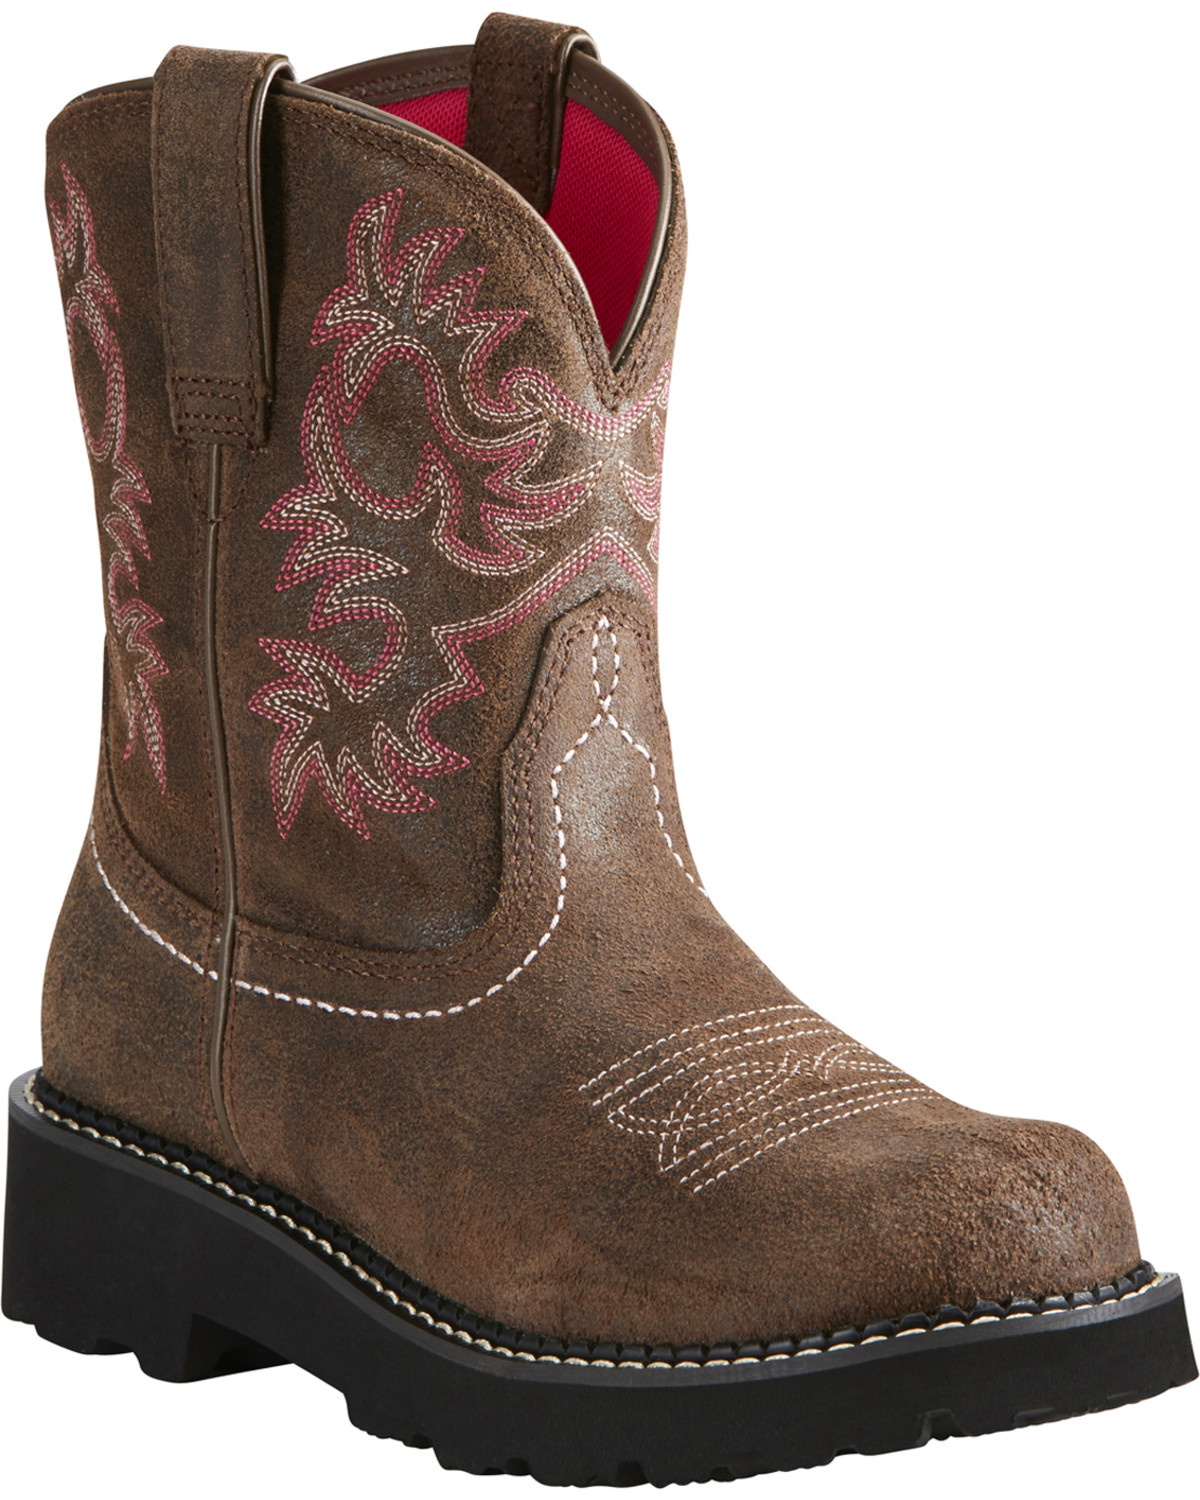 Women's boot - click or tap to browse Women's footwear at Coastal